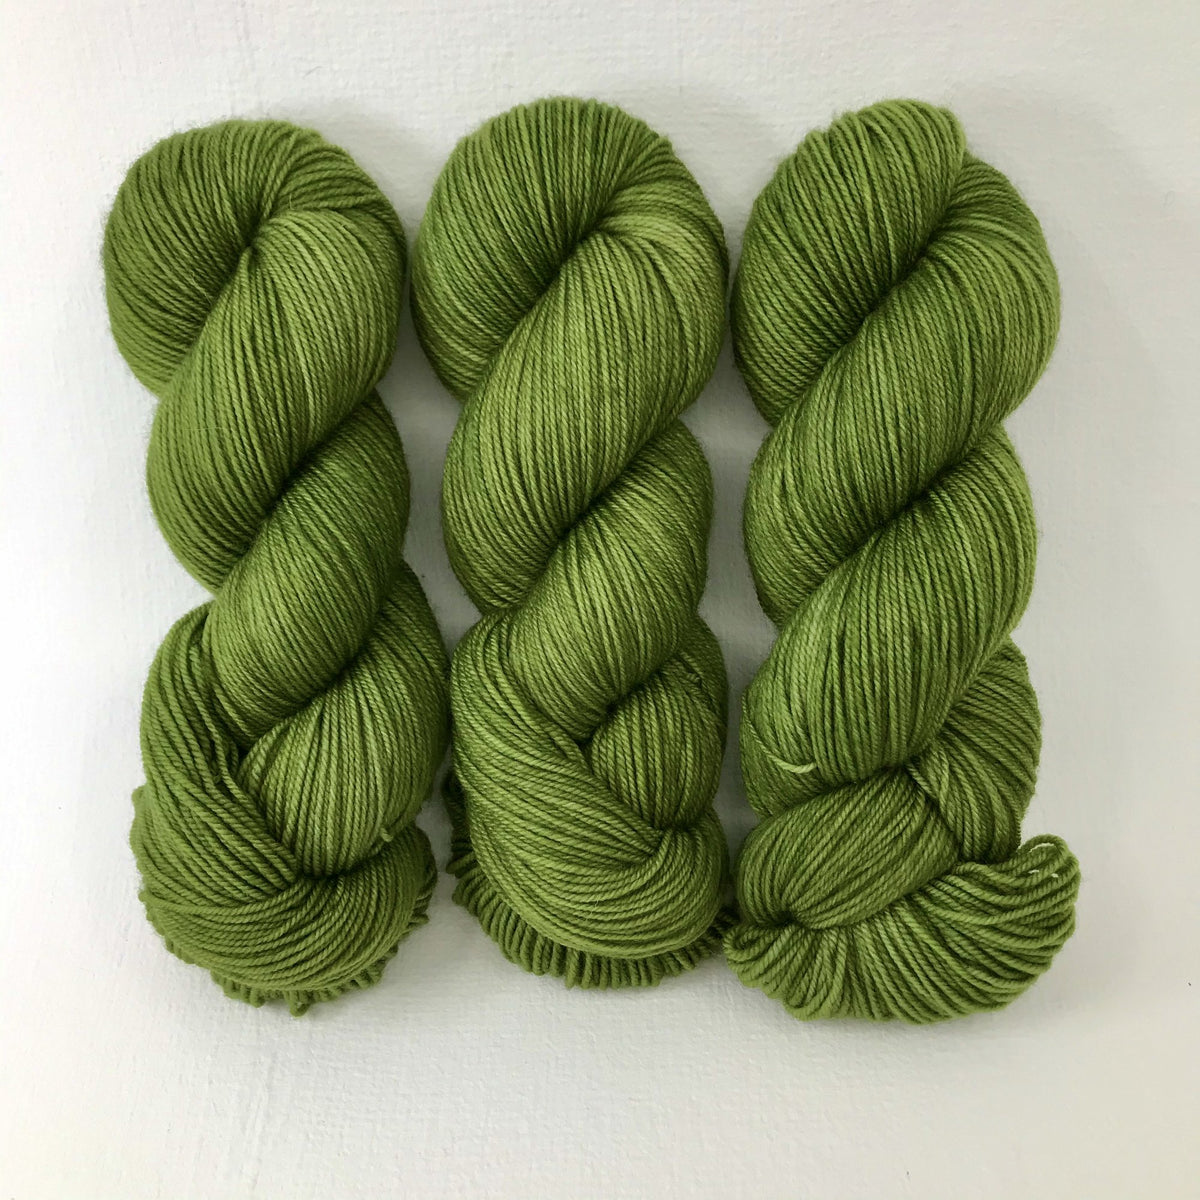 Mossy Bank - Revival Fingering - Dyed Stock